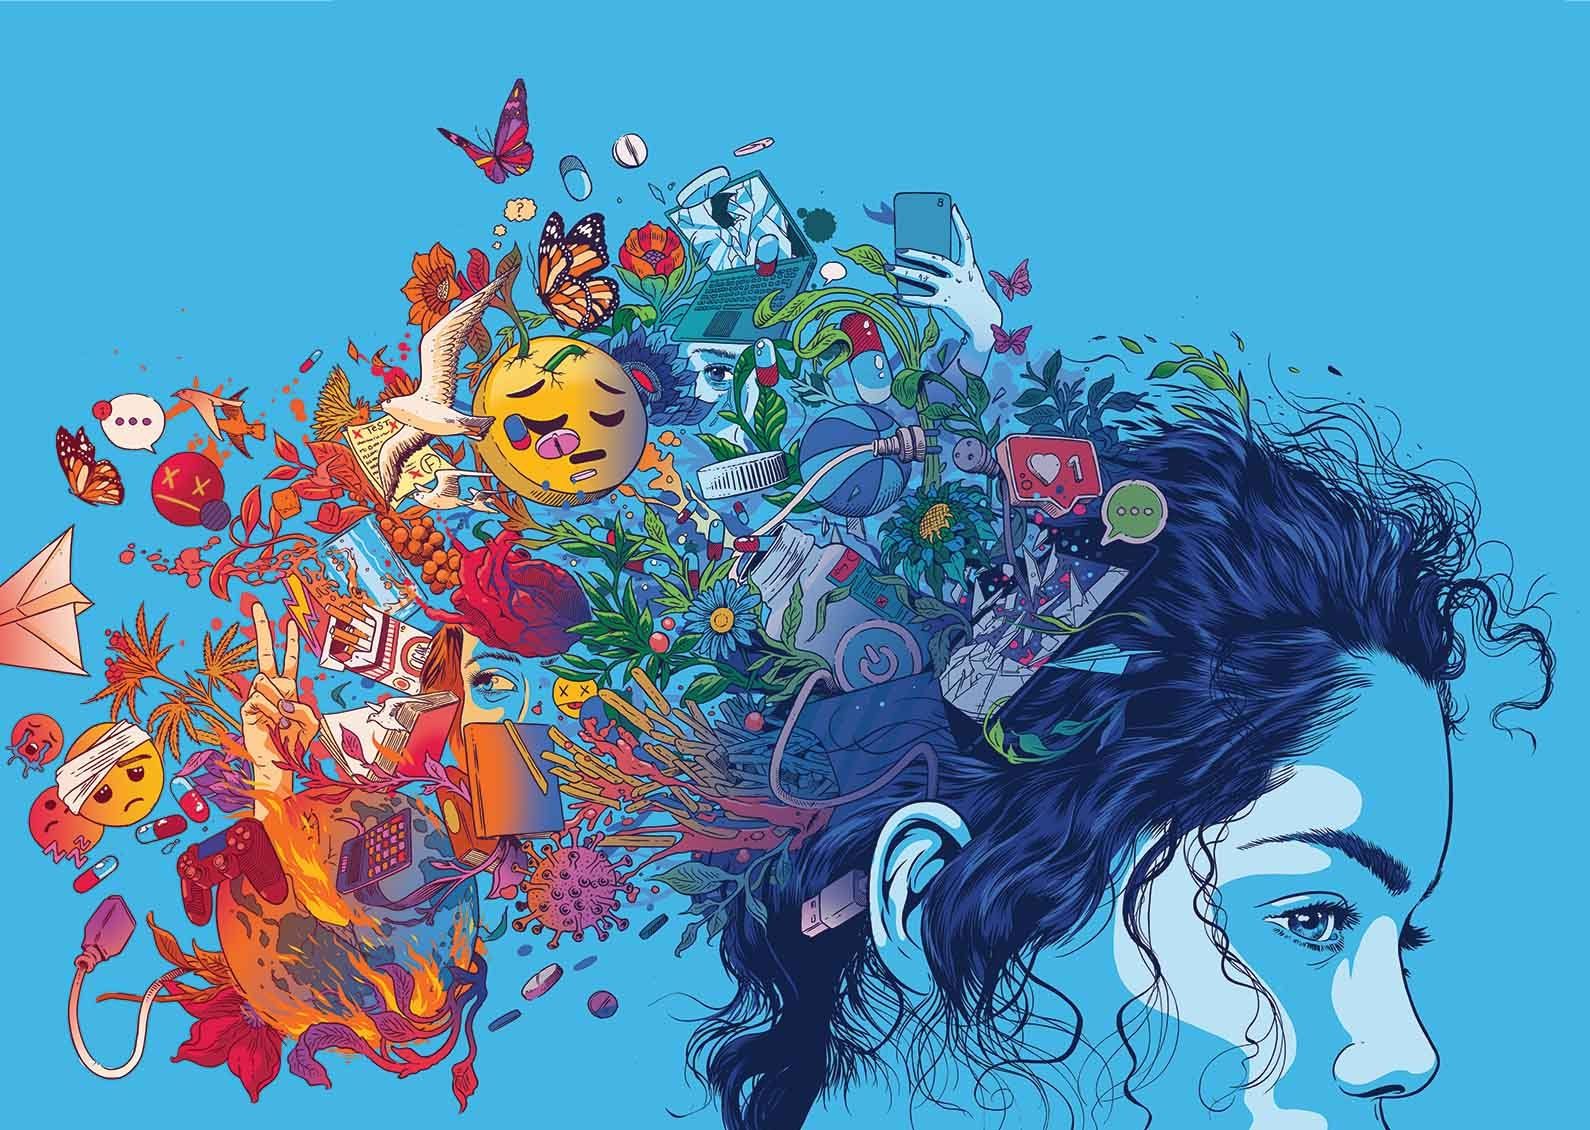 Illustration of a teenager with images of cell phones, social media like icons, pills, basketball, leaves, cigarettes, sad face emojis, earth burning, a heart, a virus, books, butterflies, and flowers flowing out of their head.